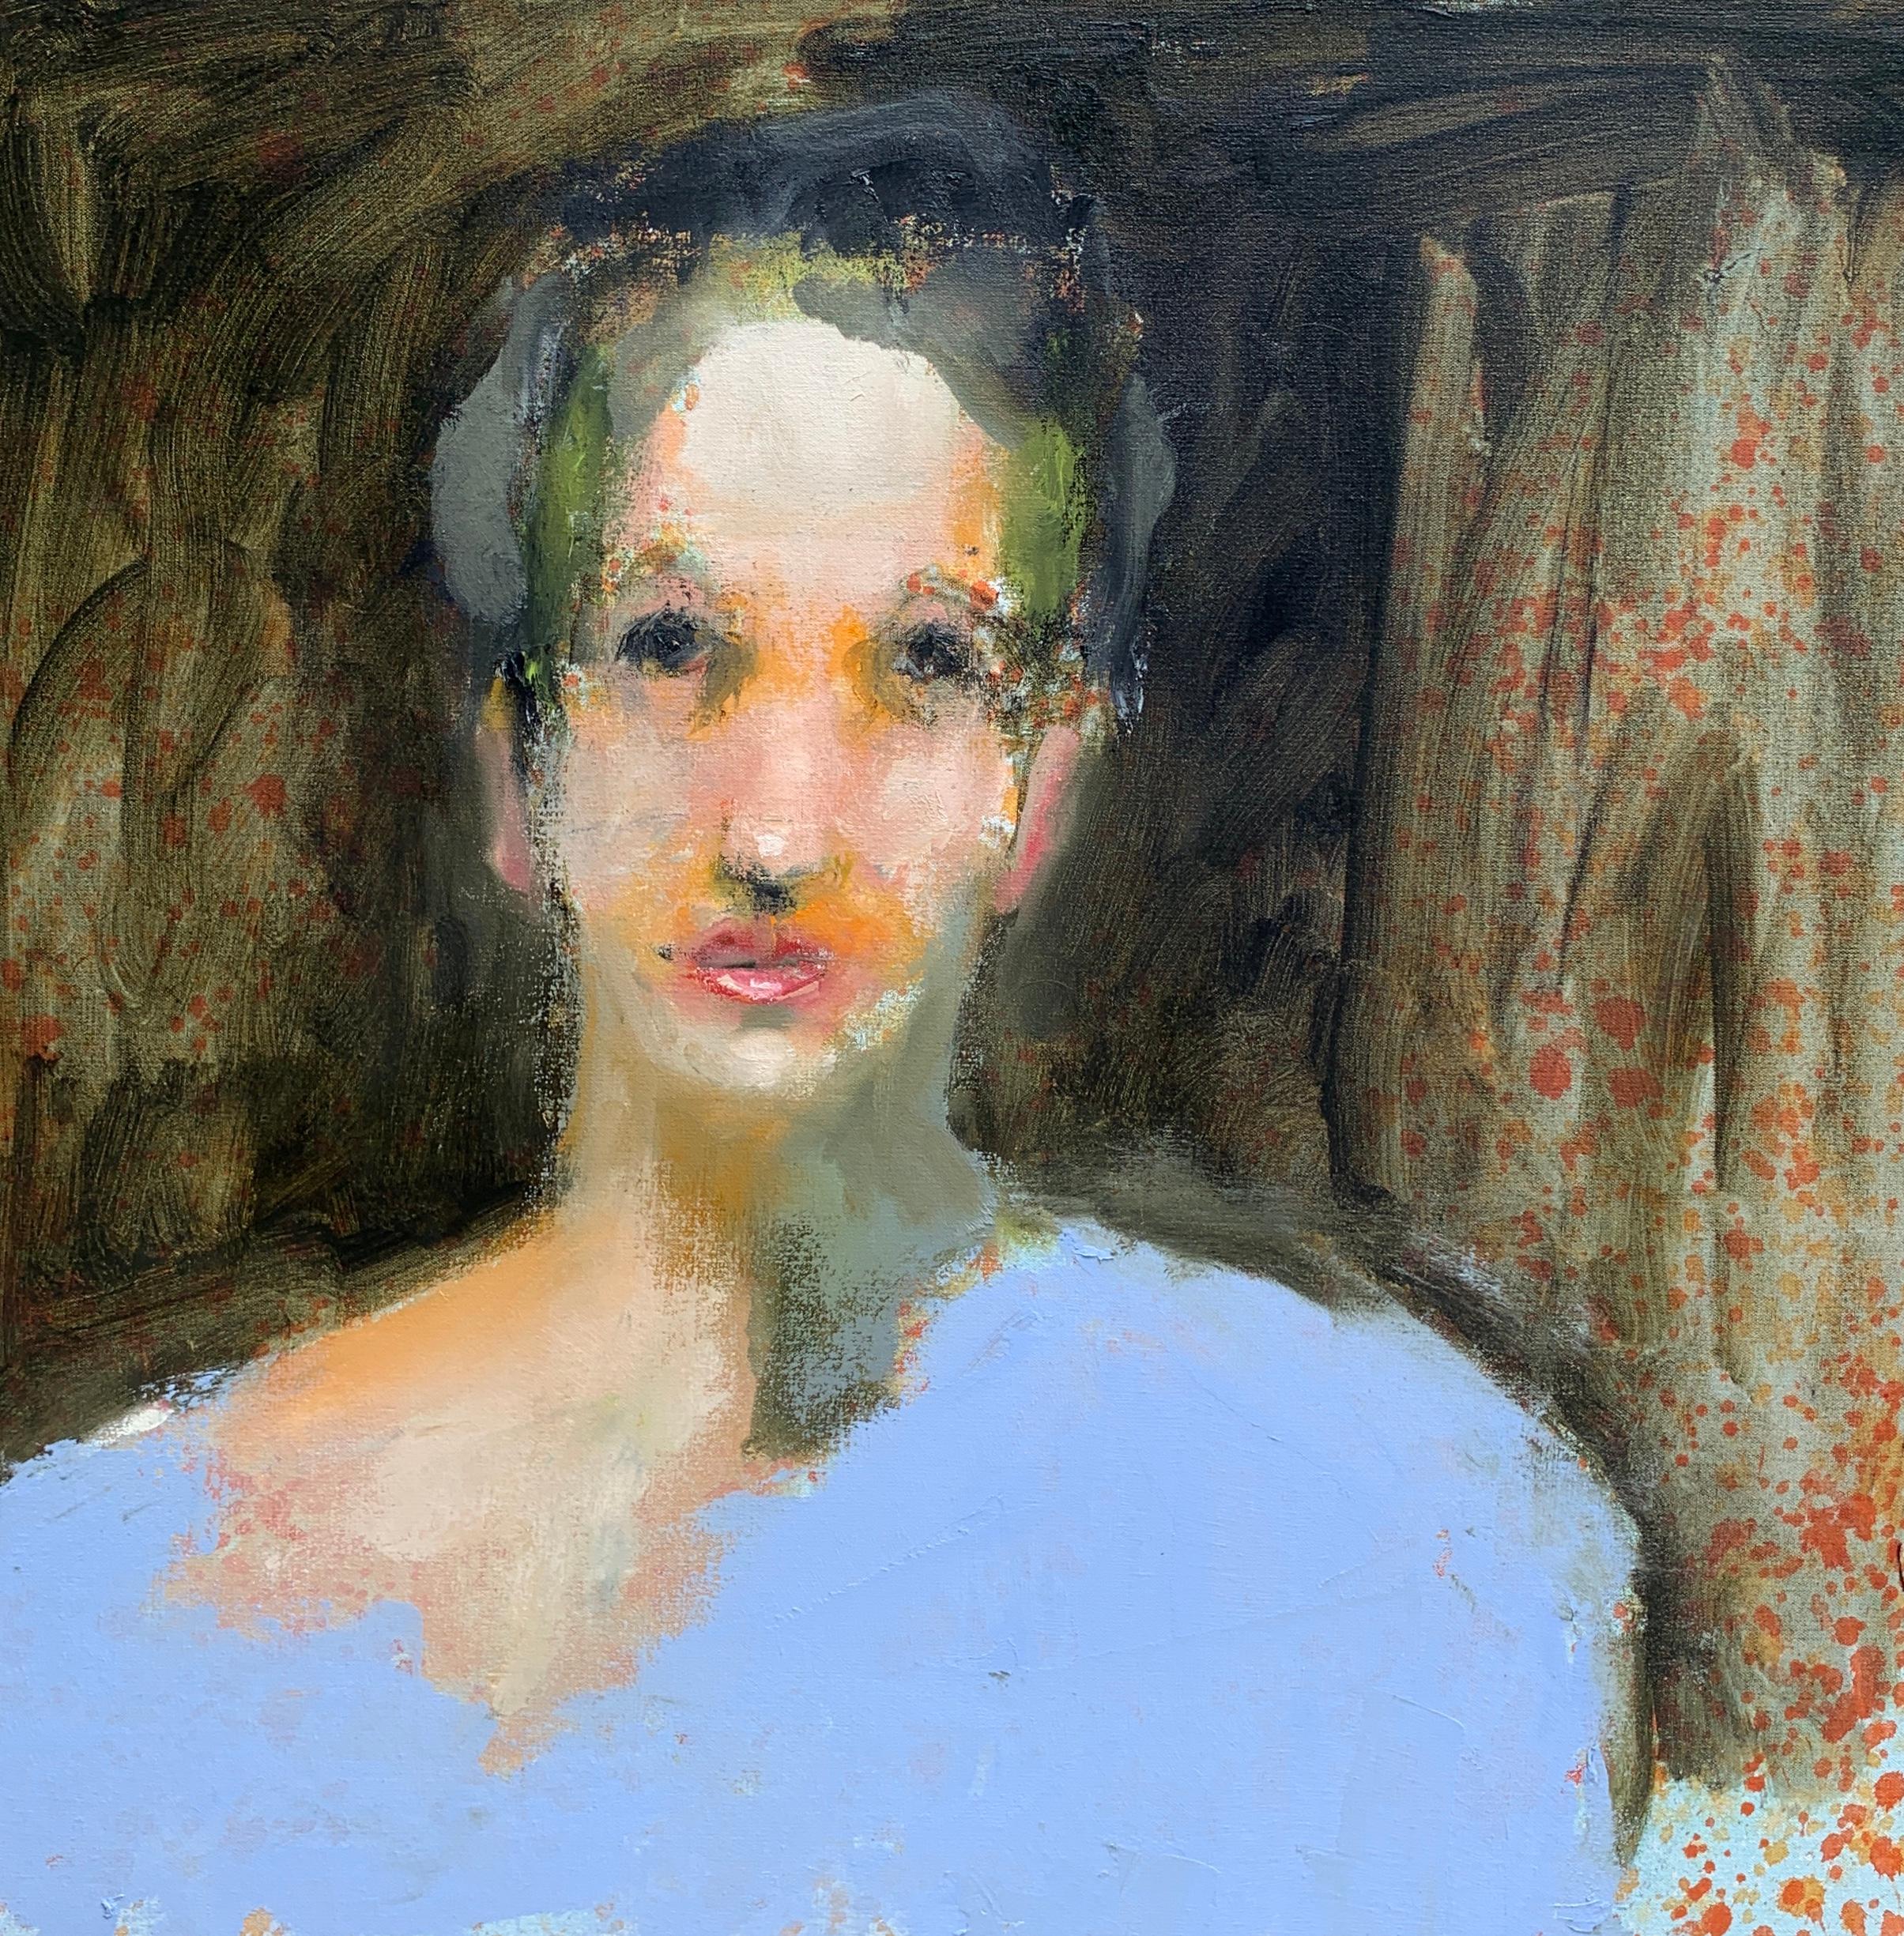 This contemporary figurative portrait by American artist Carylon Killebrew depicts a striking woman in blue looking directly at the viewer.  The palette is made up of a dark background with cream, pink, blue, green and neutrals in the palette.  The